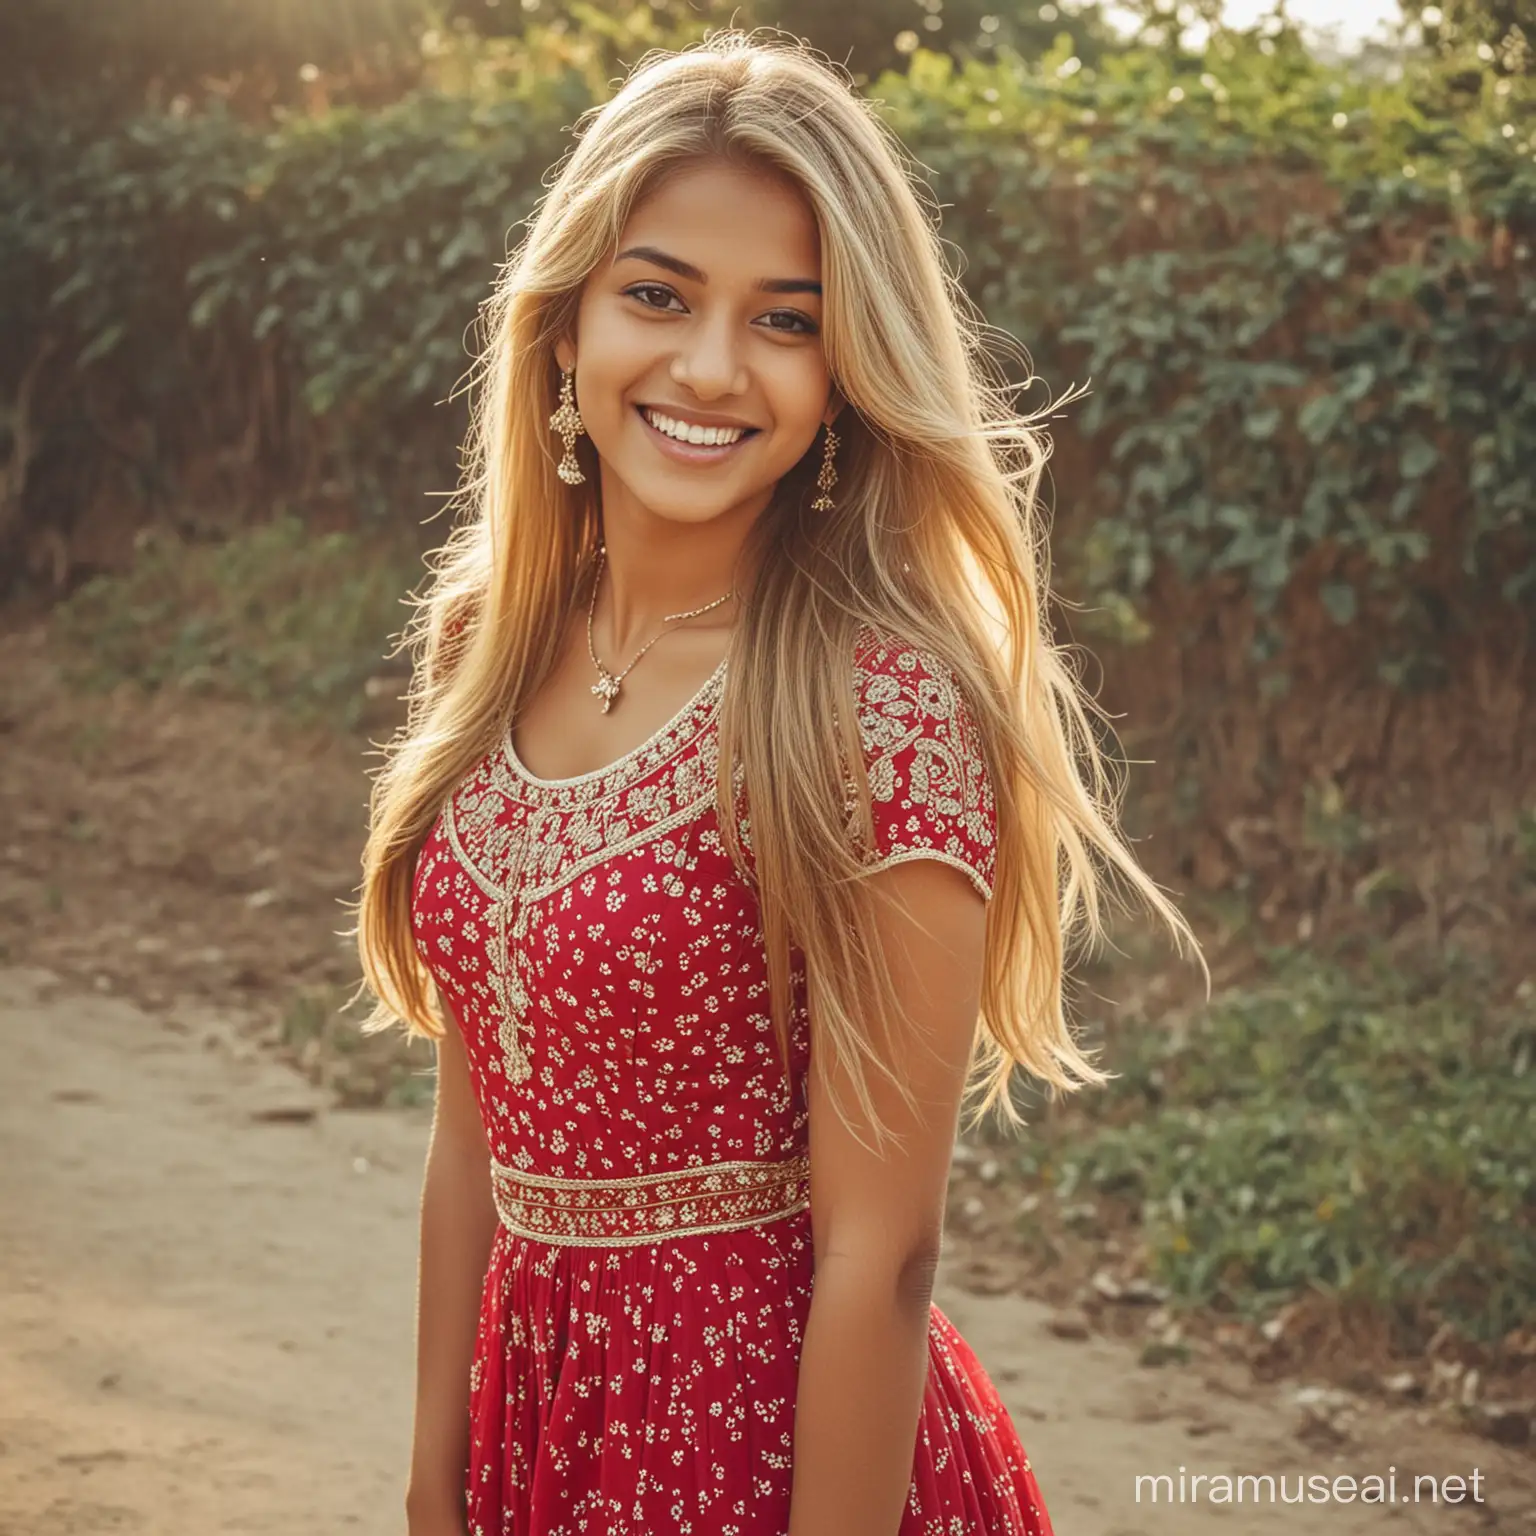 Blonde Girl in Traditional Indian Dress Smiling